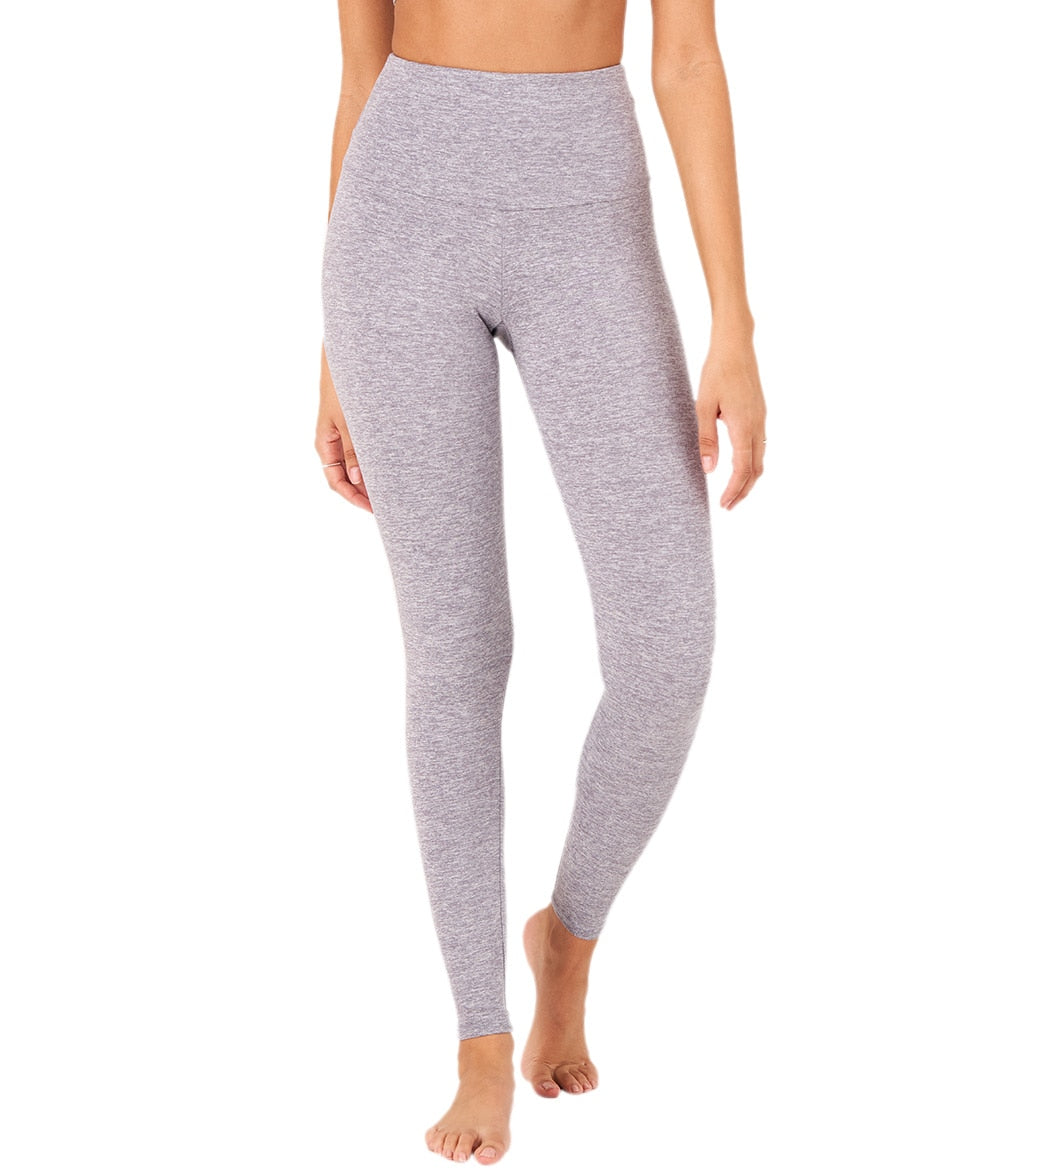 Onzie Luxe 7/8 Yoga Leggings at YogaOutlet.com - Free Shipping